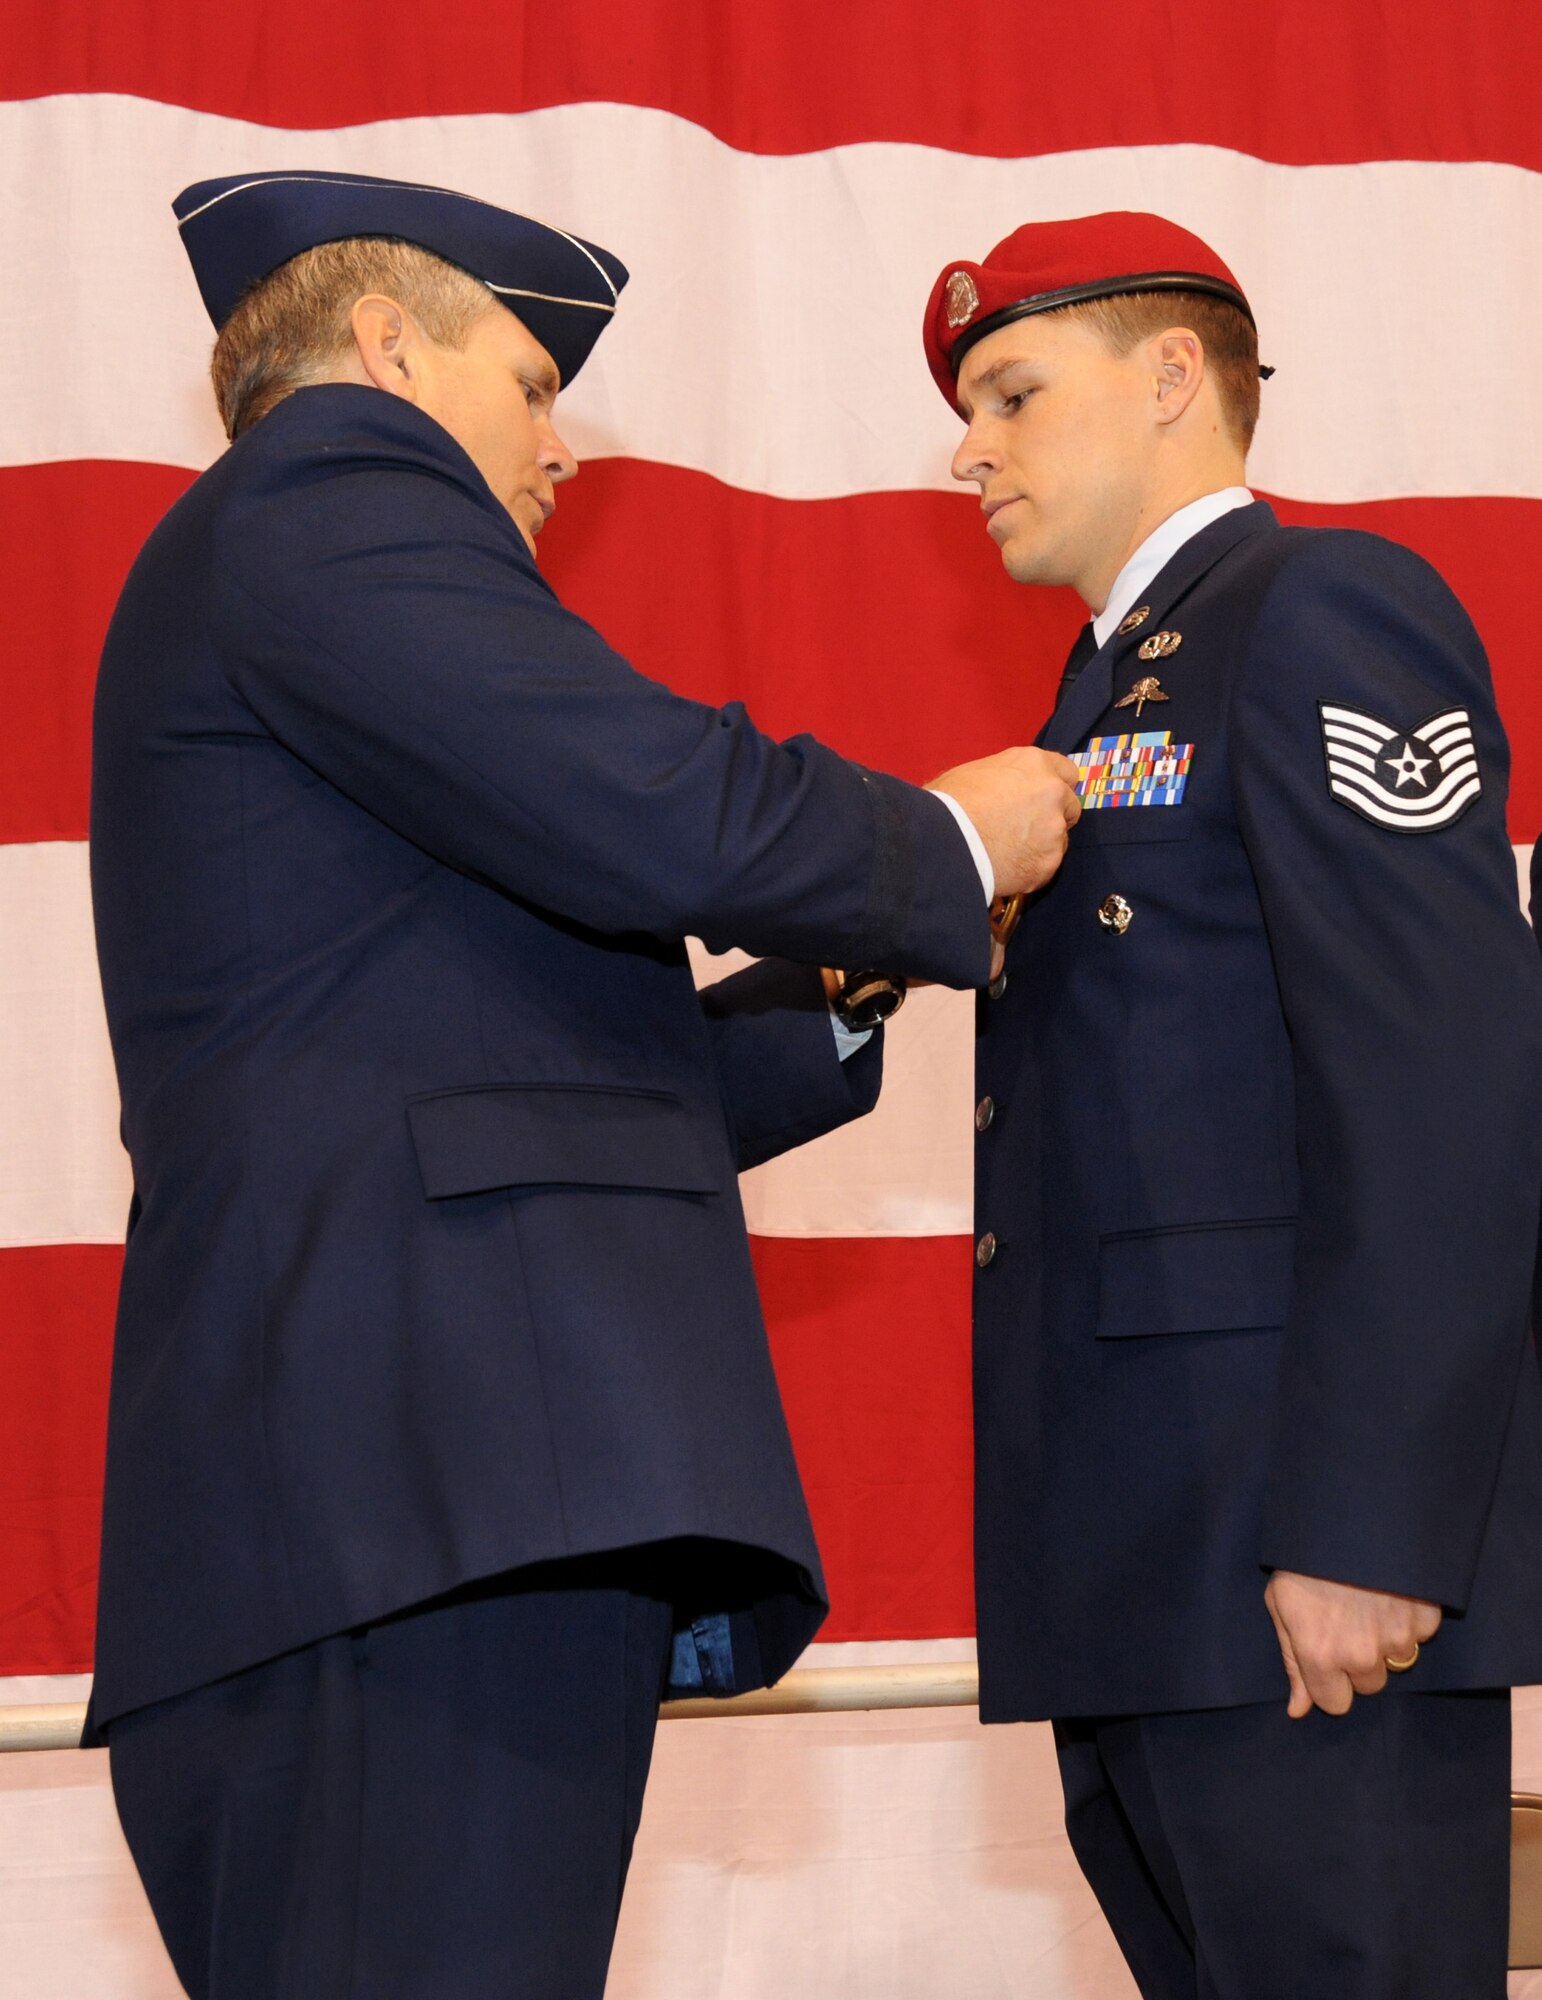 U.S. Air Force Lt. Gen. Eric E. Feil, commander of Air Force Special Operations Command, awards the Purple Heart Medal to Tech. Sgt. Douglas J. Matthews of the 125th Special Tactics Squadron during an award ceremony held at the Portland Air National Guard Base, Portland, Ore., Jan. 23.  The event honored Airmen from the unit with five Bronze Star Medals and one Purple Heart medal.  The Airmen earned the medals during recent deployments to the Middle East. Fiel flew in from AFSOC headquarters at Hulburt Field, Fla., for the ceremony (U.S. Air Force photo by Tech. Sgt. John Hughel, 142nd Fighter Wing Public Affairs/Released)